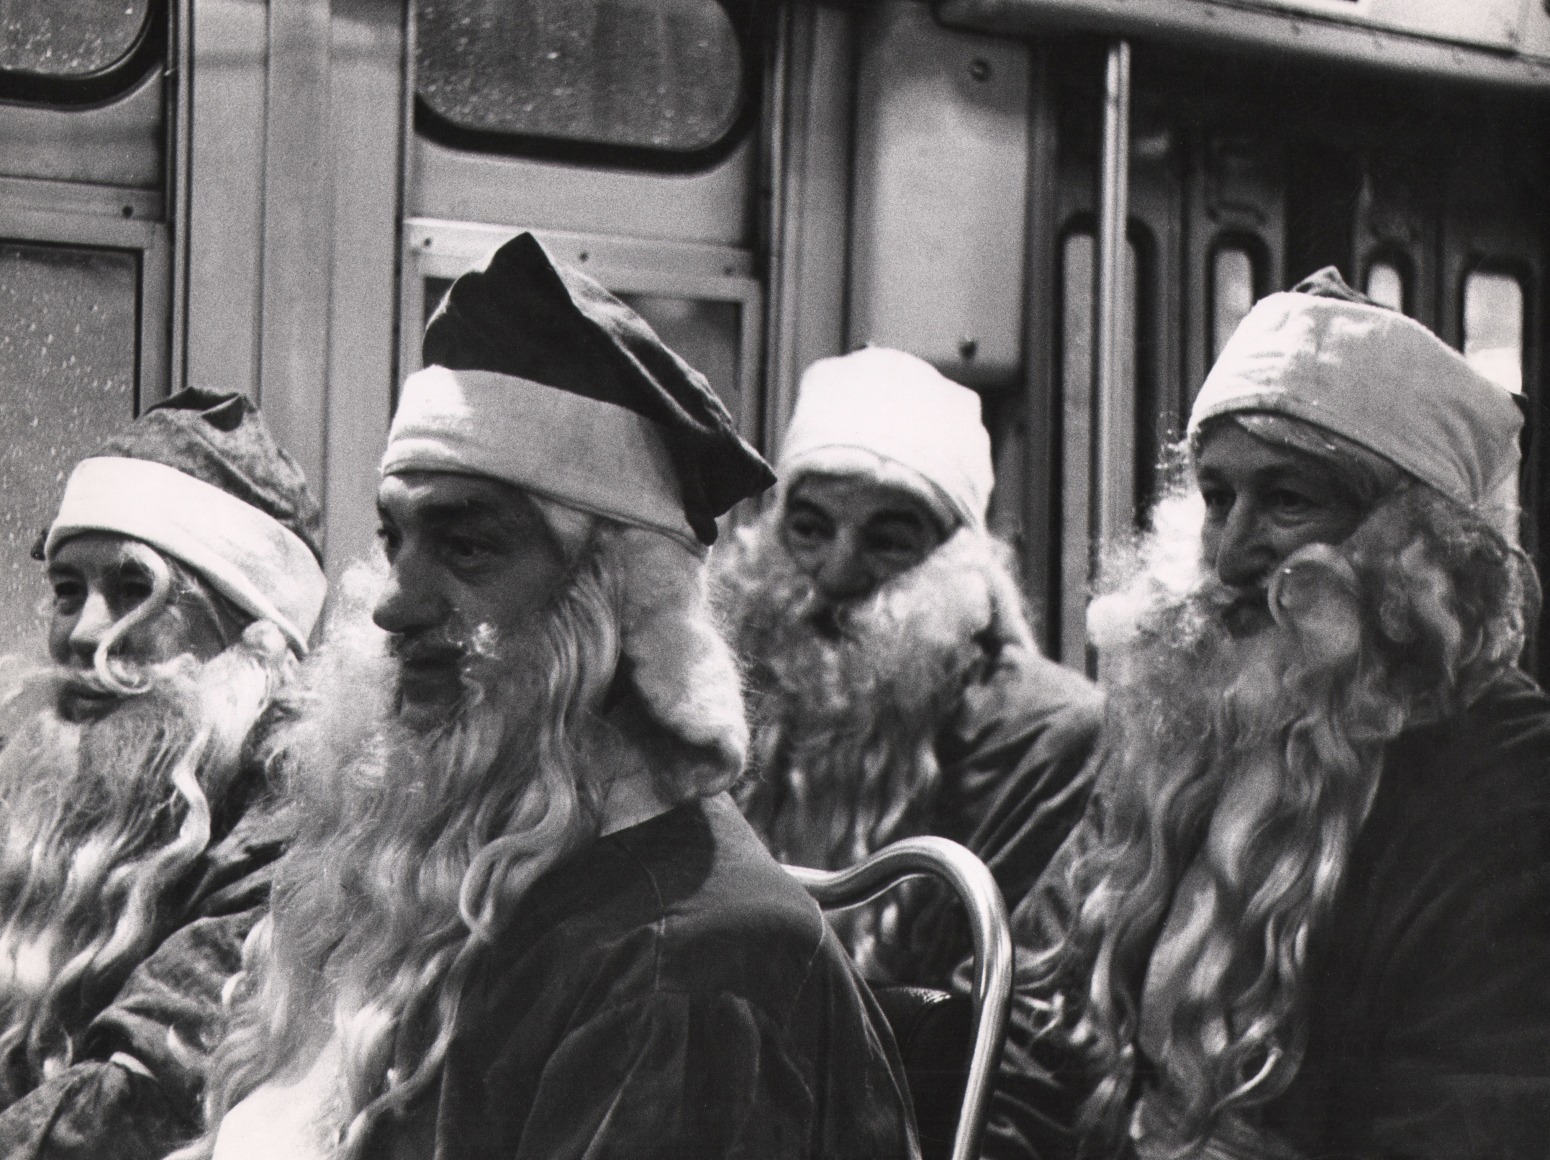 50. Bedrich Grunzweig, Four Santas in a New York Bus, Christmas, ​1954. Four seated men in Santa costumes in two rows of two.